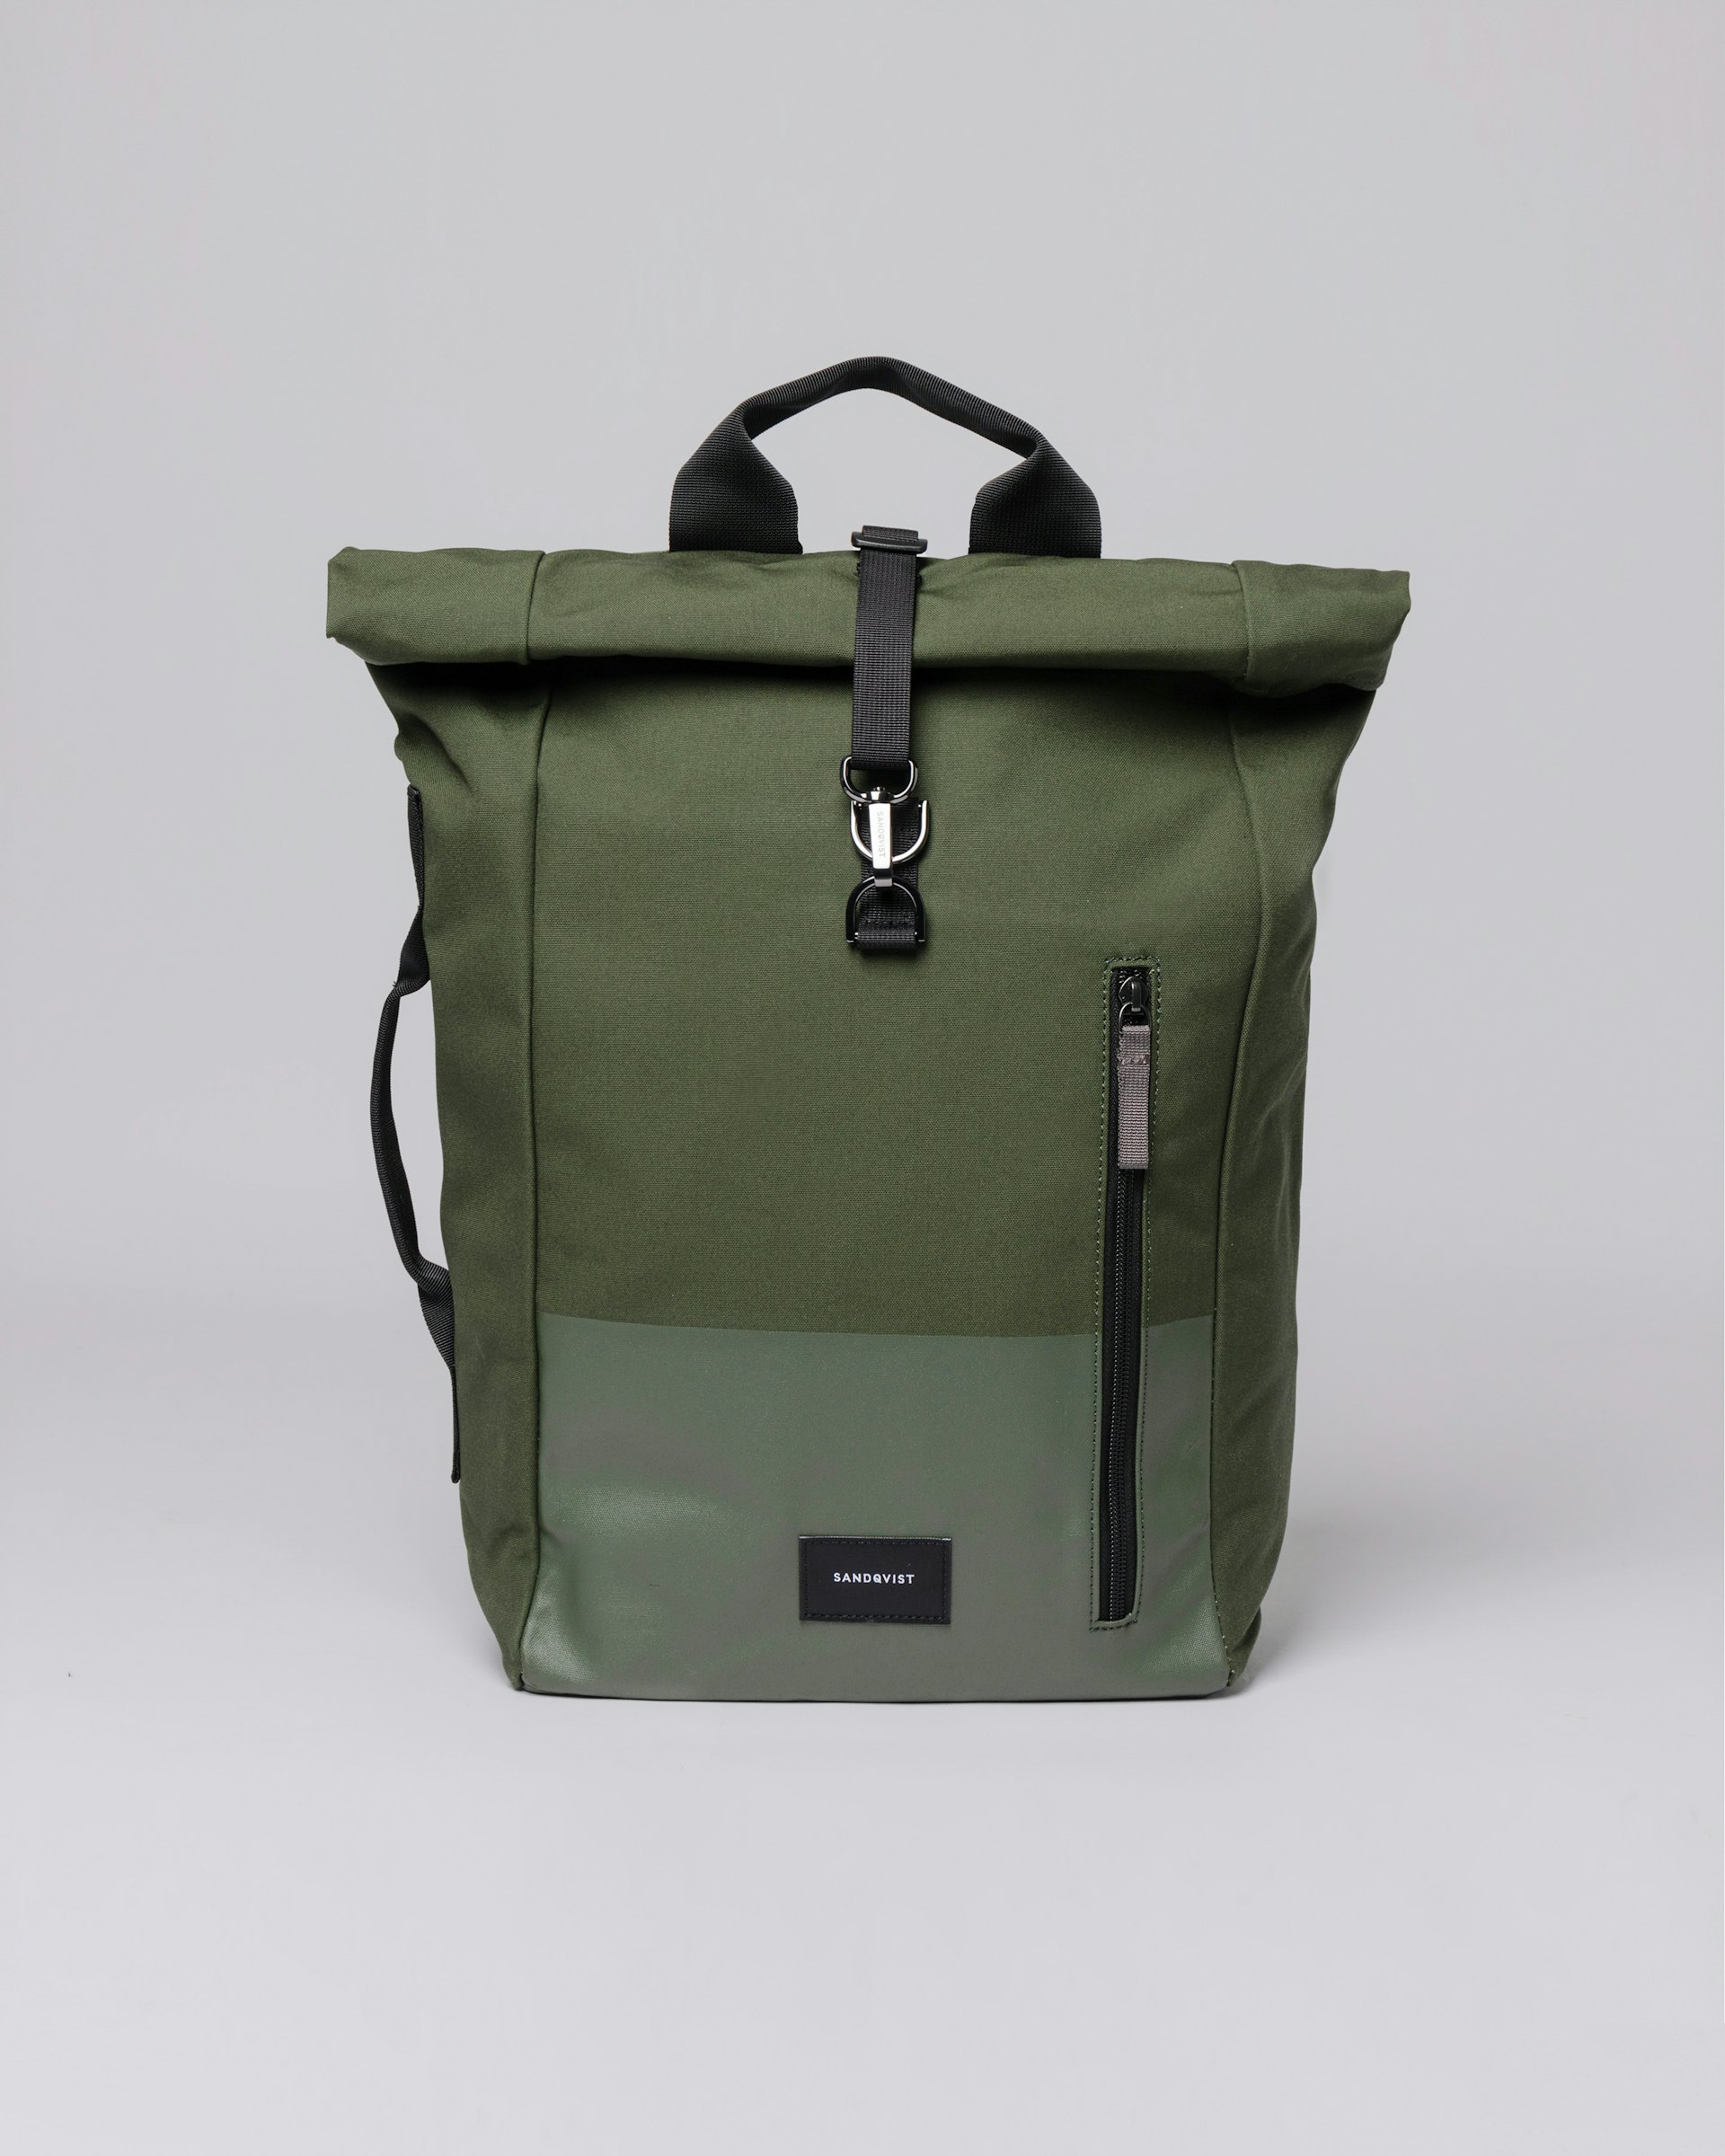 Dante vegan belongs to the category Backpacks and is in color dawn green (1 of 6)